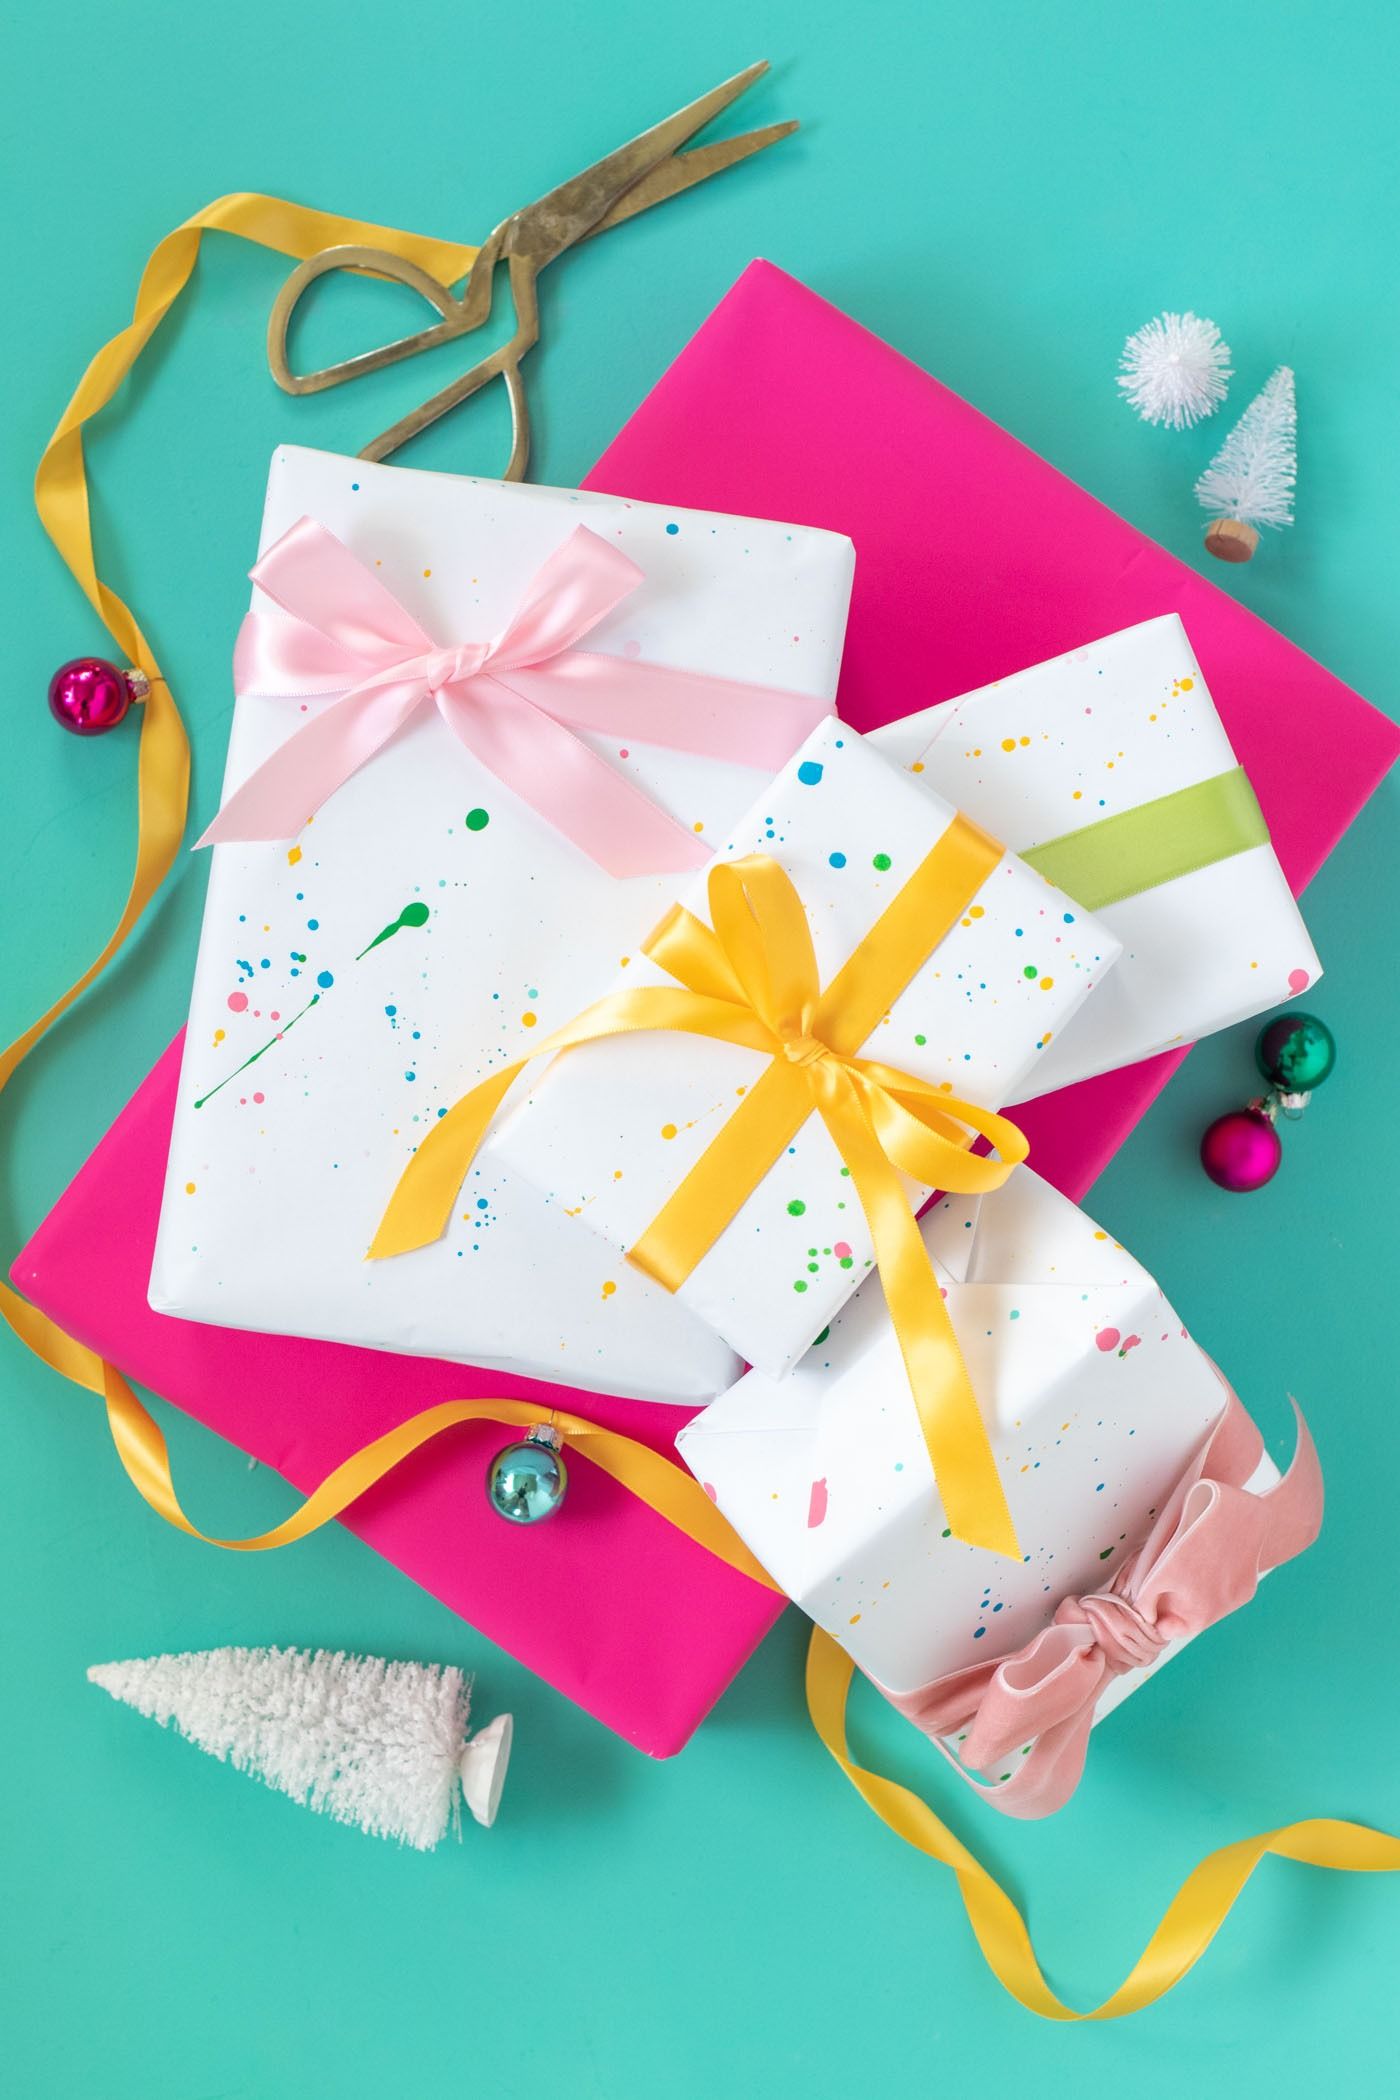 https://hips.hearstapps.com/hmg-prod/images/christmas-gift-wrapping-ideas-splatter-painted-gift-wrap-1666627968.jpeg